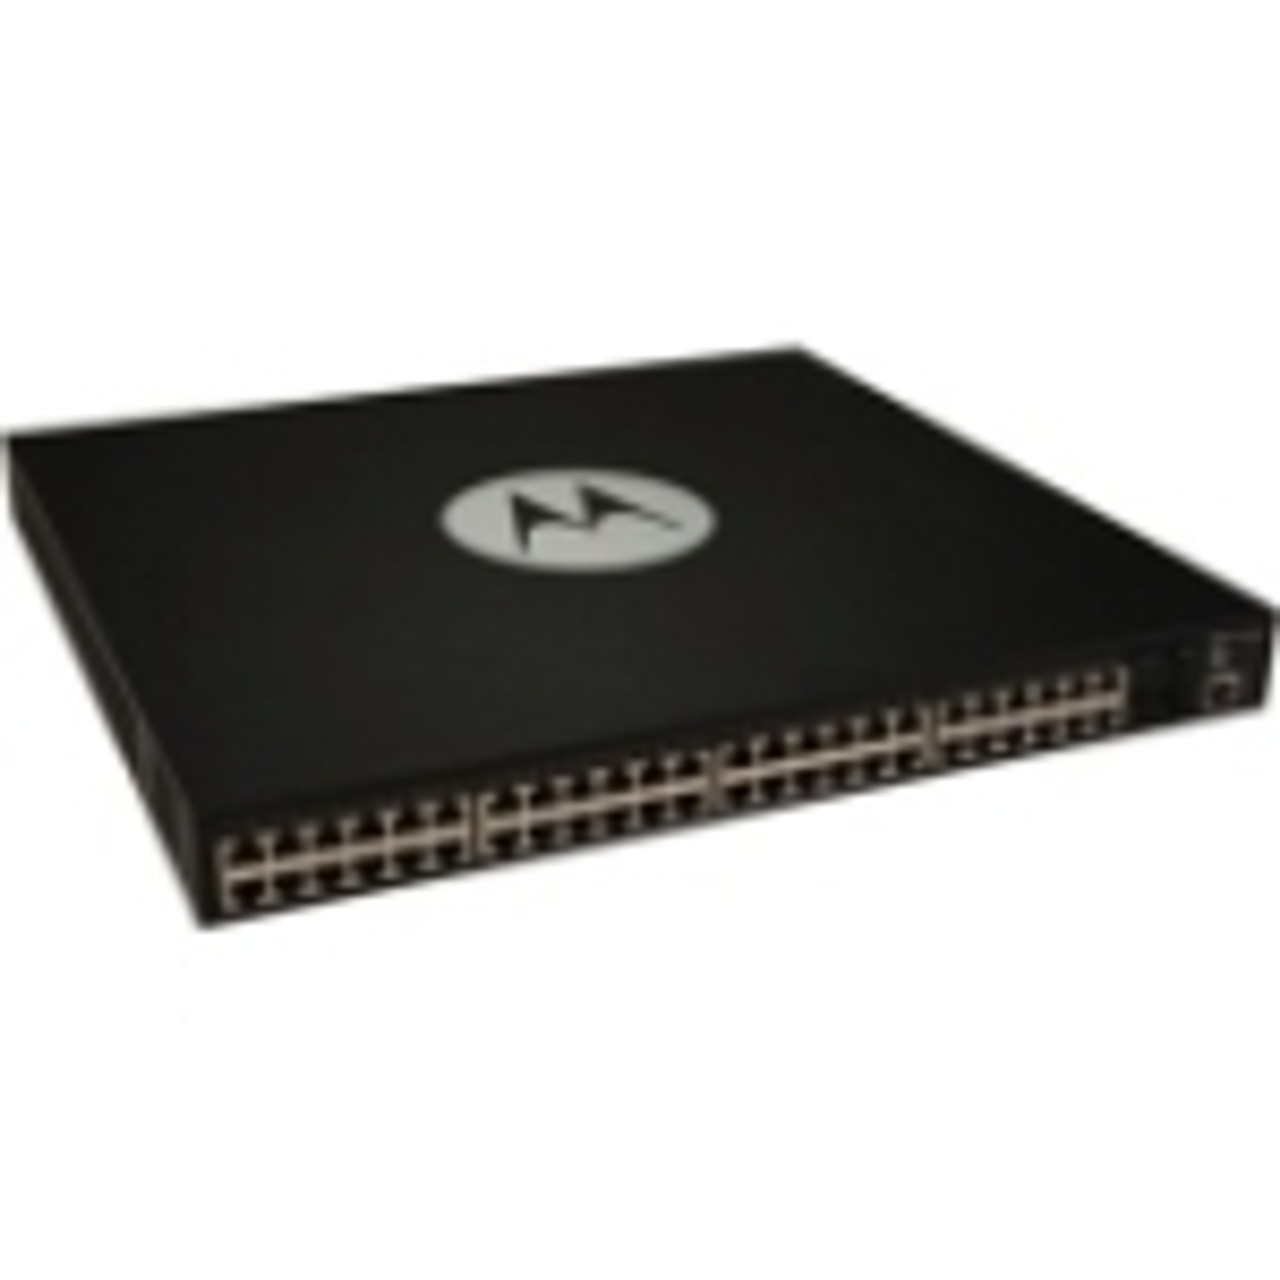 EX-3548-0000-00-WR Zebra Ethernet Switch 48 Ports 4 x Expansion Slots 10/100/1000Base-T 4 x SFP Slots 2 Layer Supported (Refurbished)